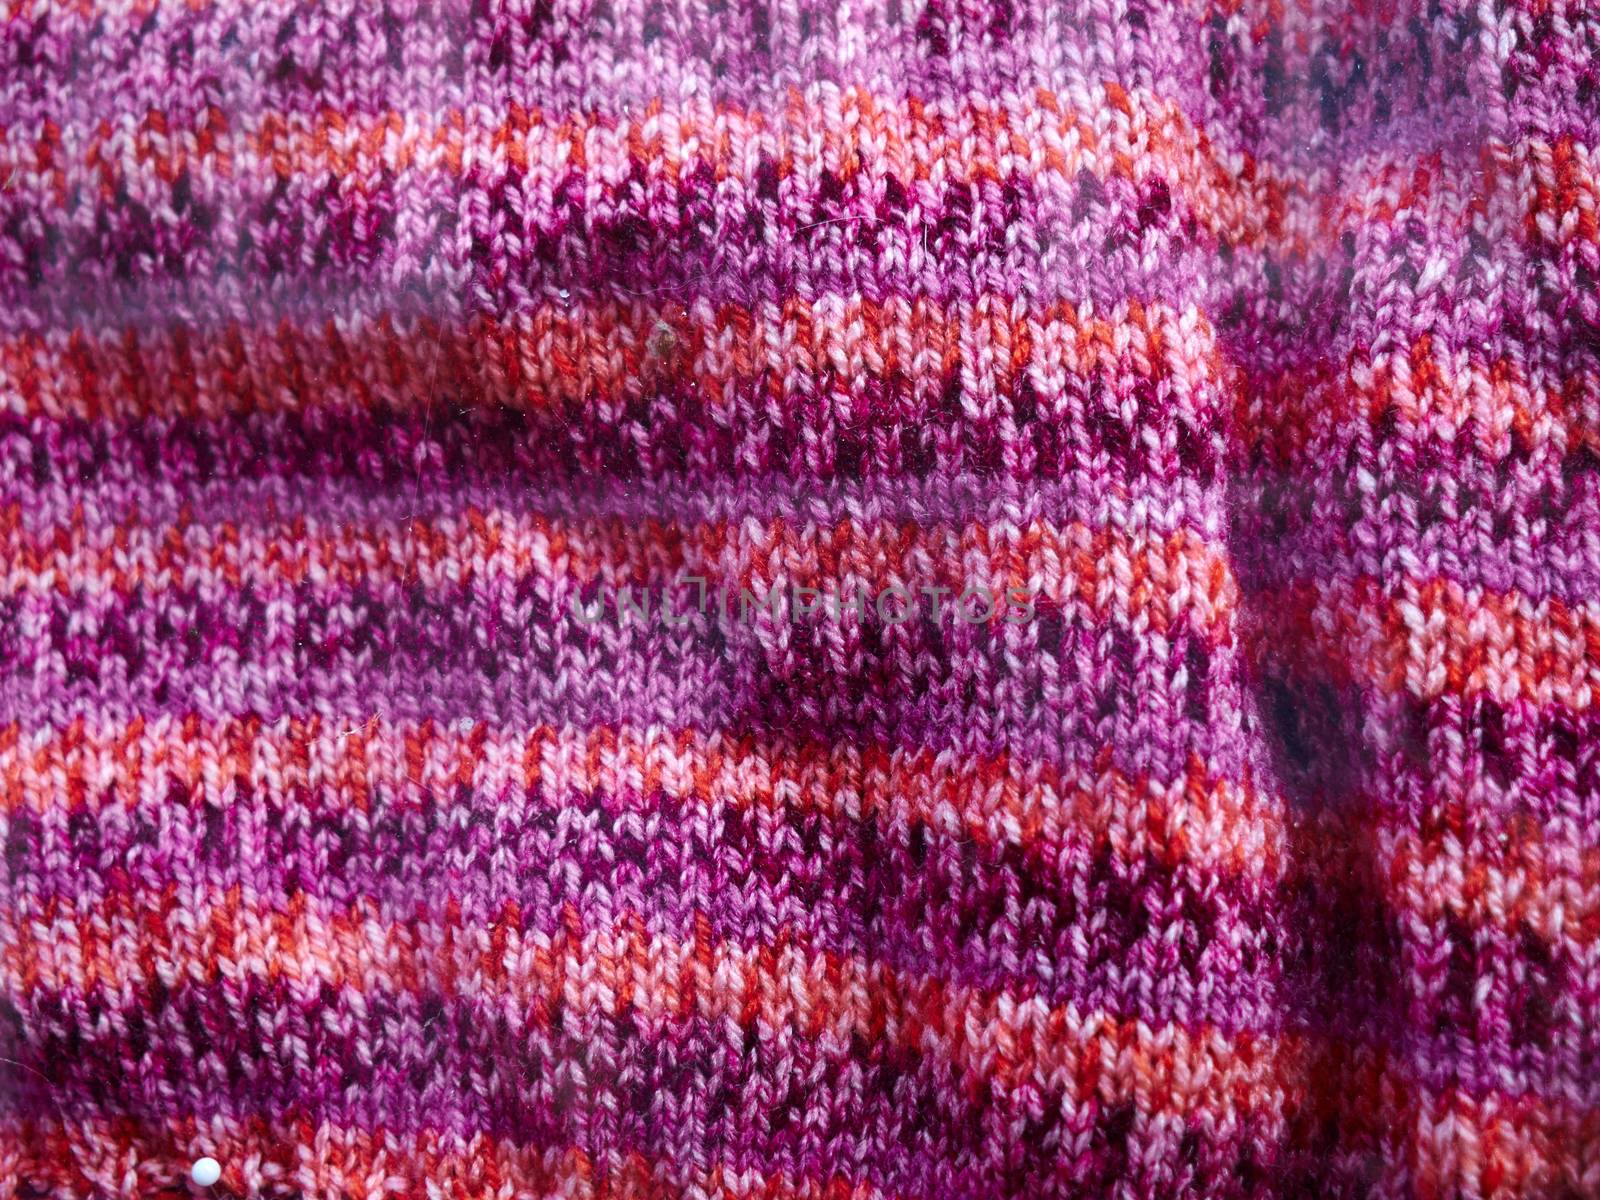 Natural Knitted Wool in Bright Pink, Orange and Purple Colors Background